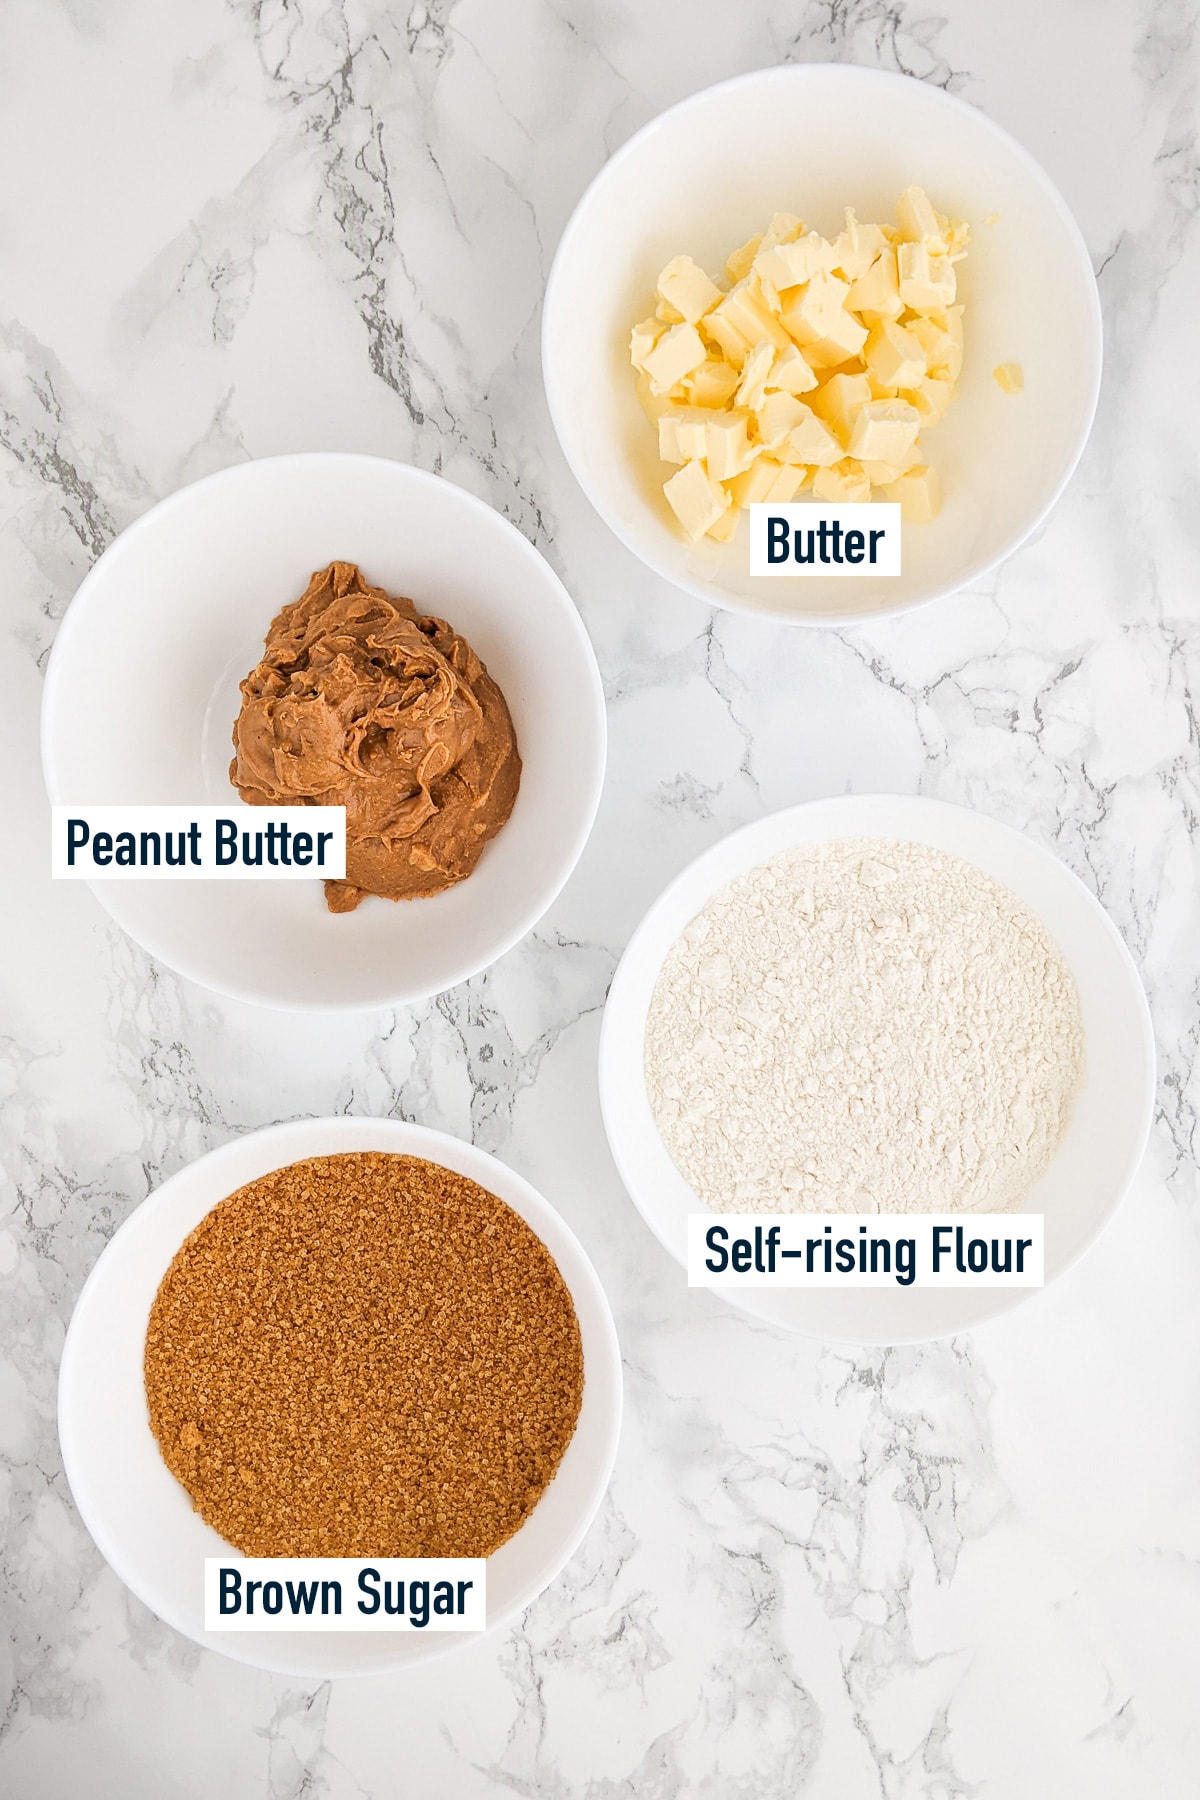 Top view of butter, sugar, flour and peanut butter on a marble table.